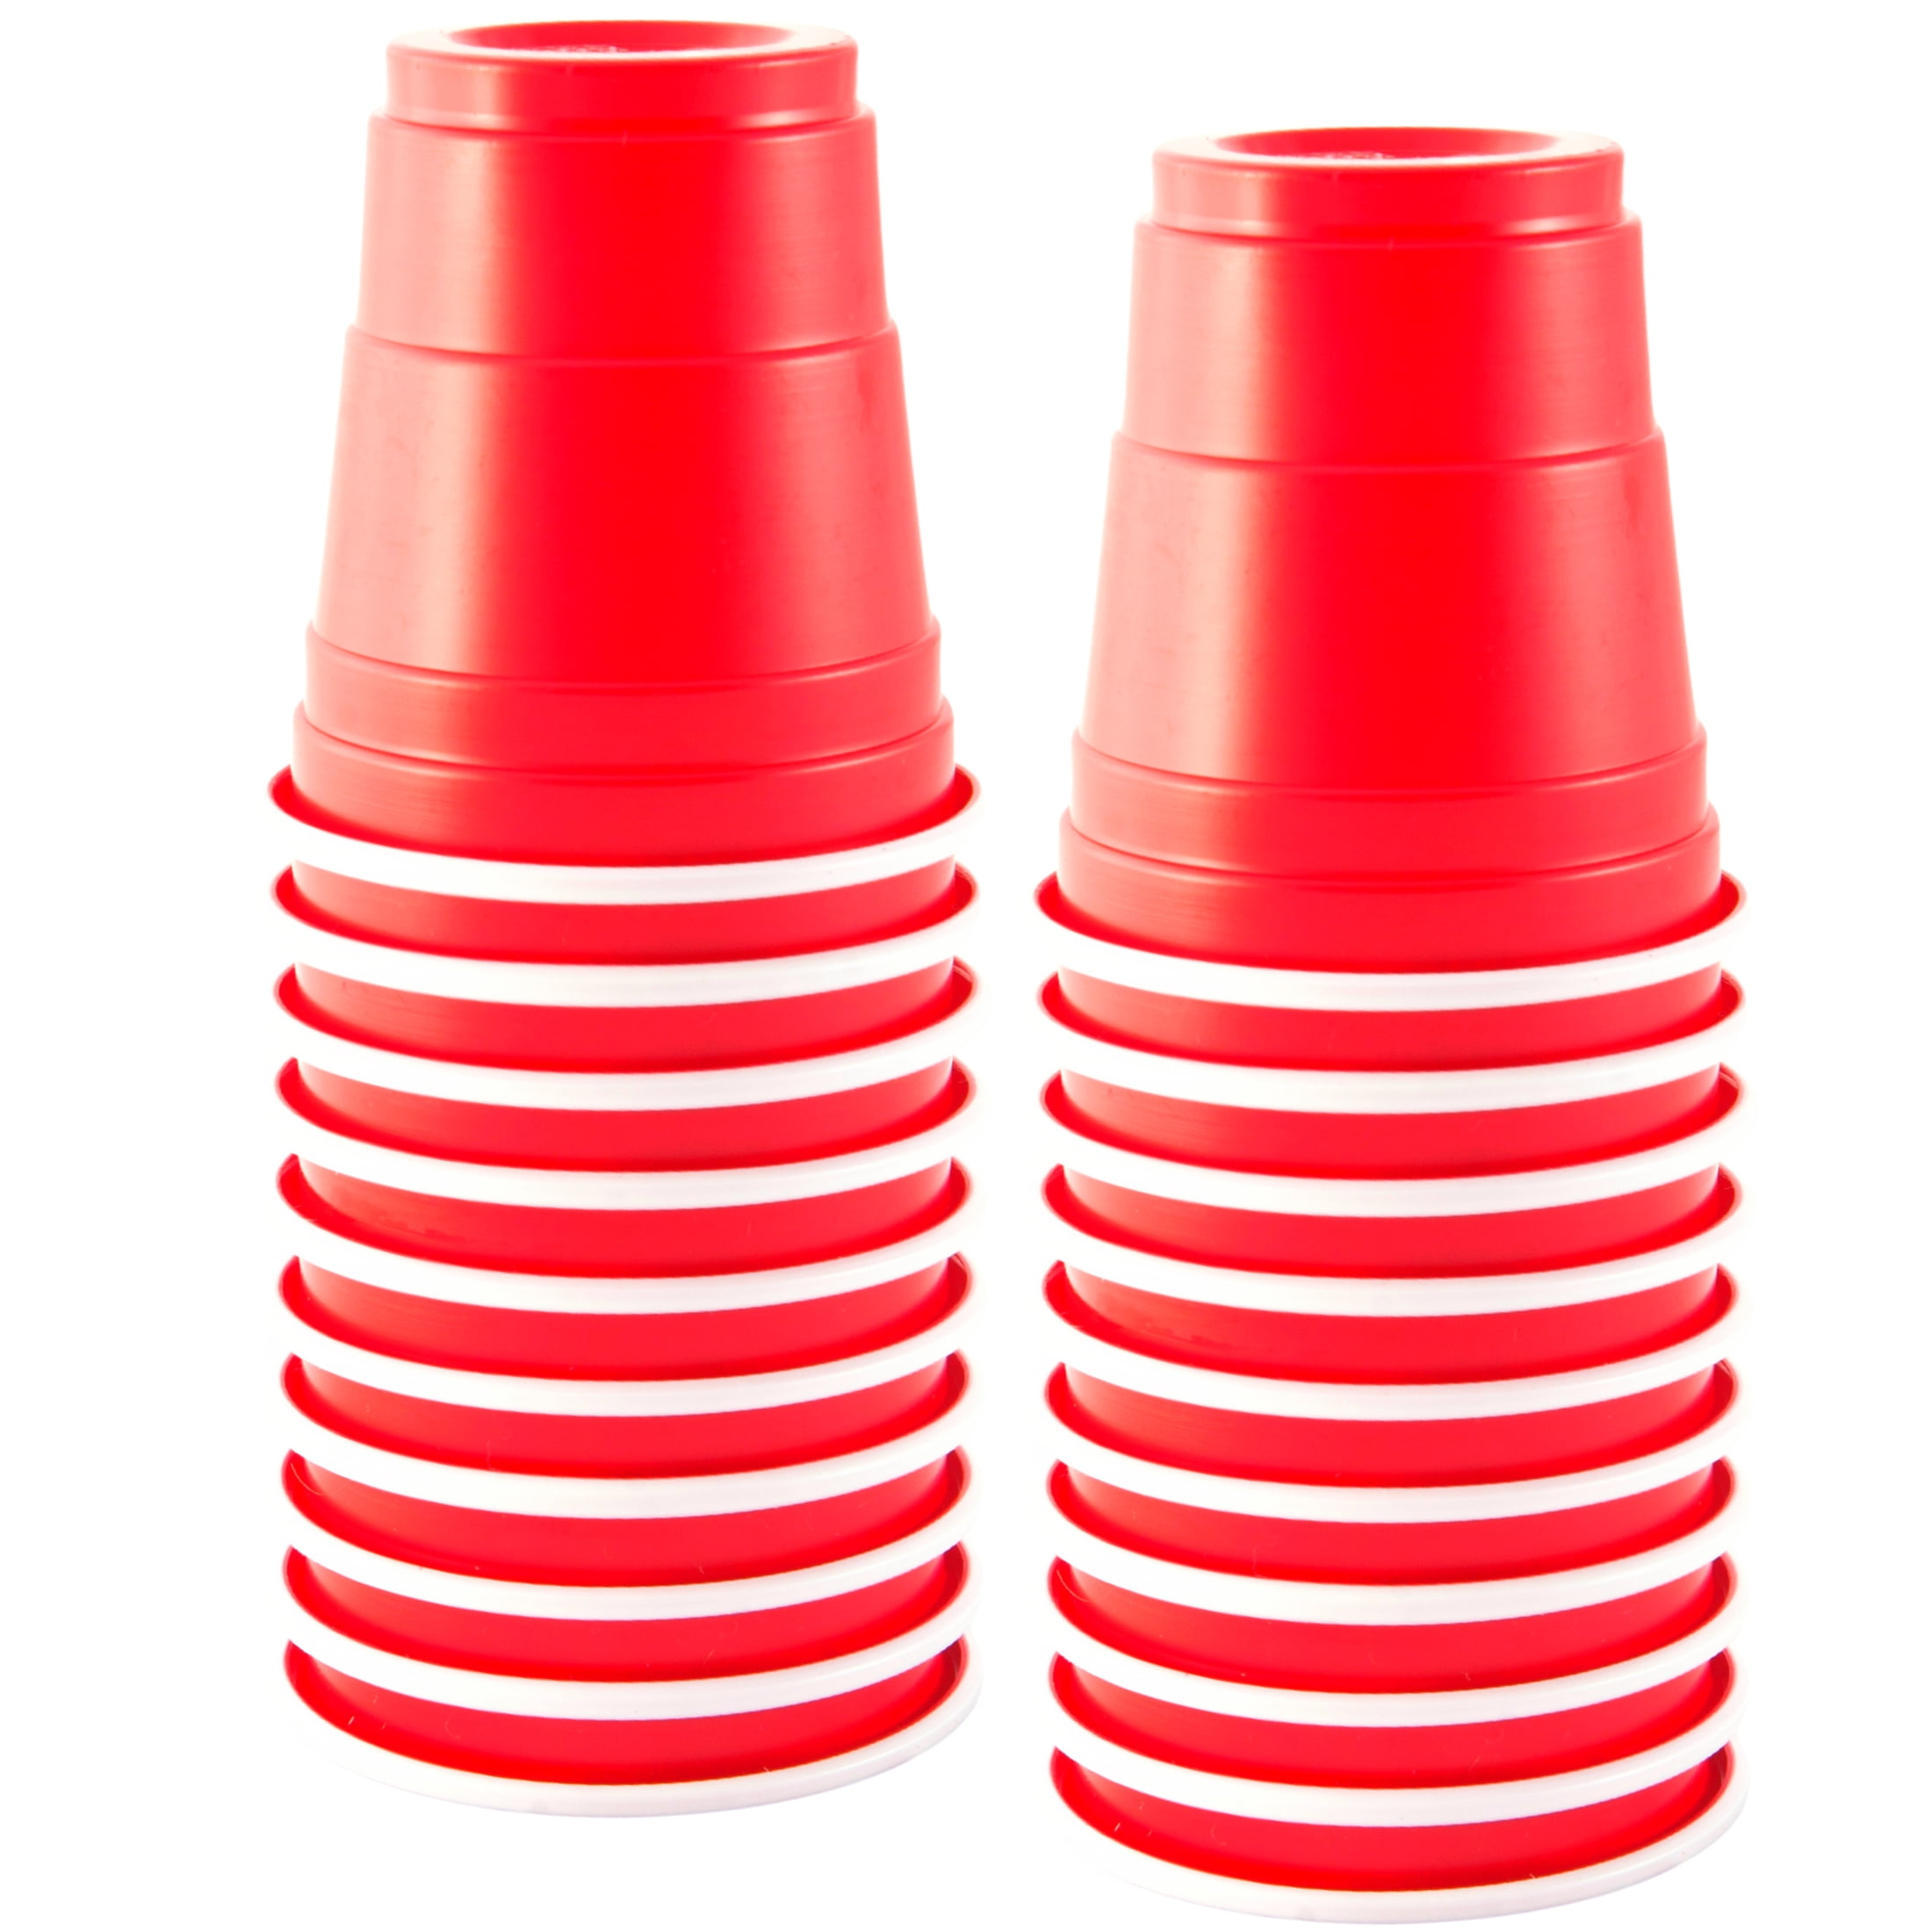 2000 CASE Mini Red Plastic Shot Glass 2 Oz Party Drink Cold Solo Shooter Cup